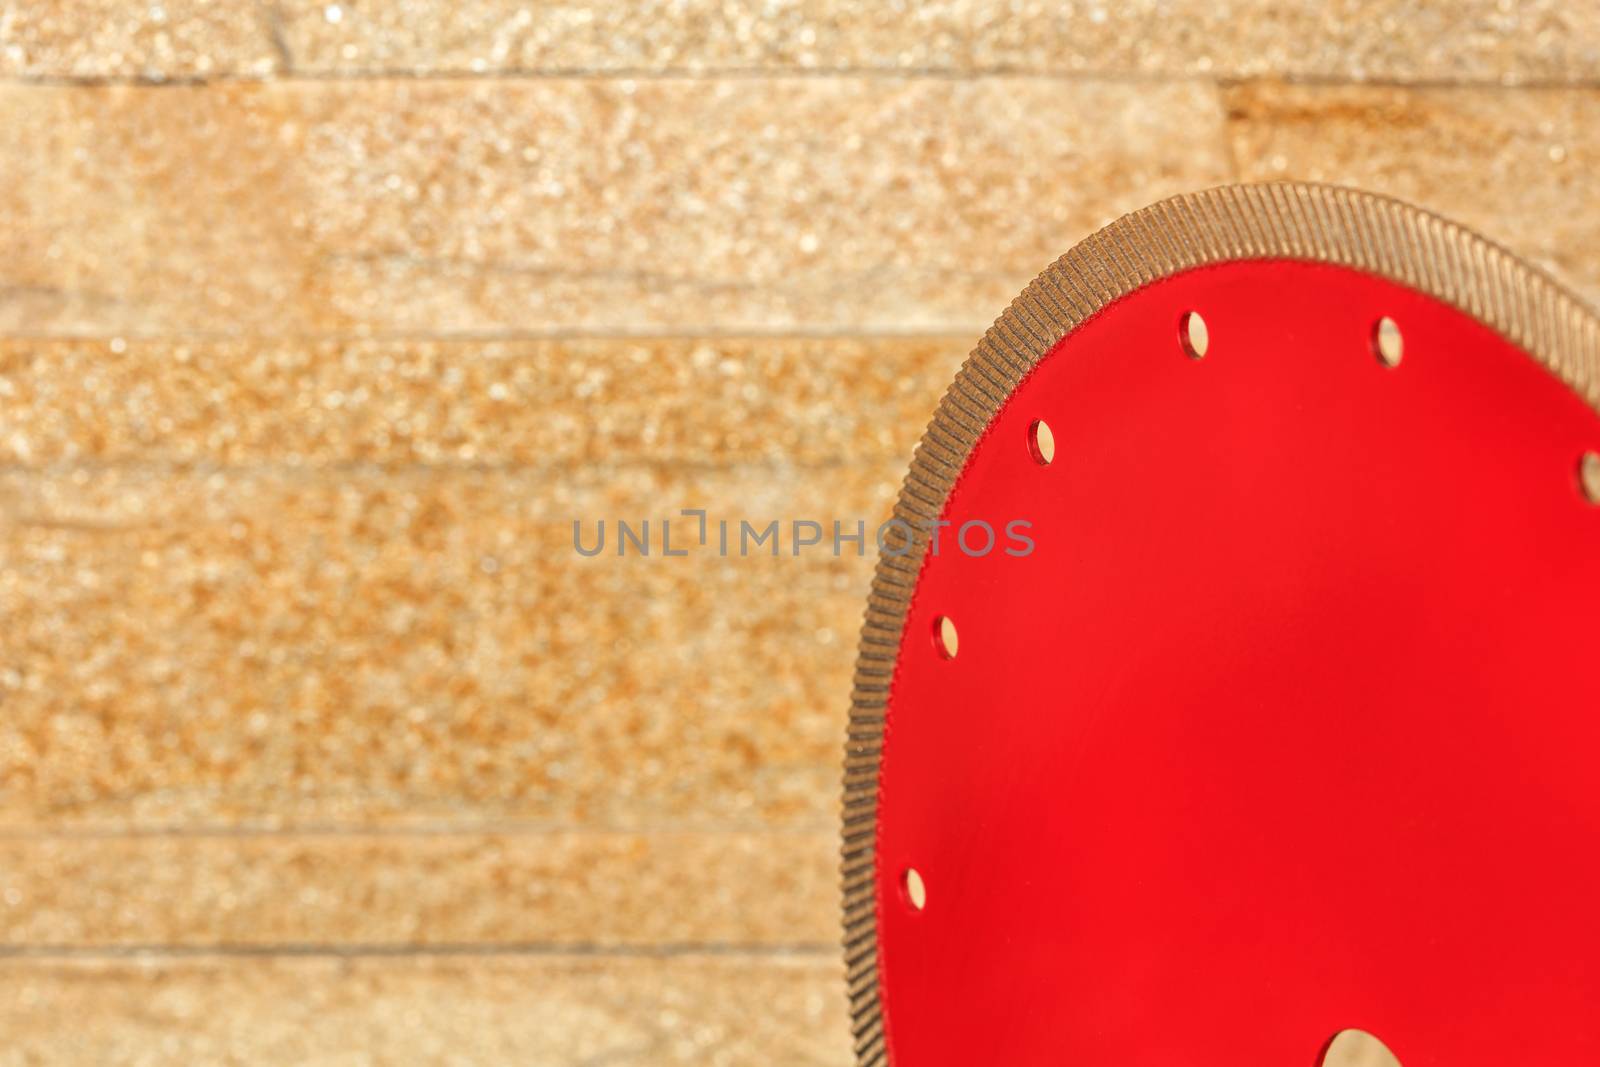 A fragment of a red diamond blade for cutting granite is turned toward the wall of golden sandstone. by Sergii